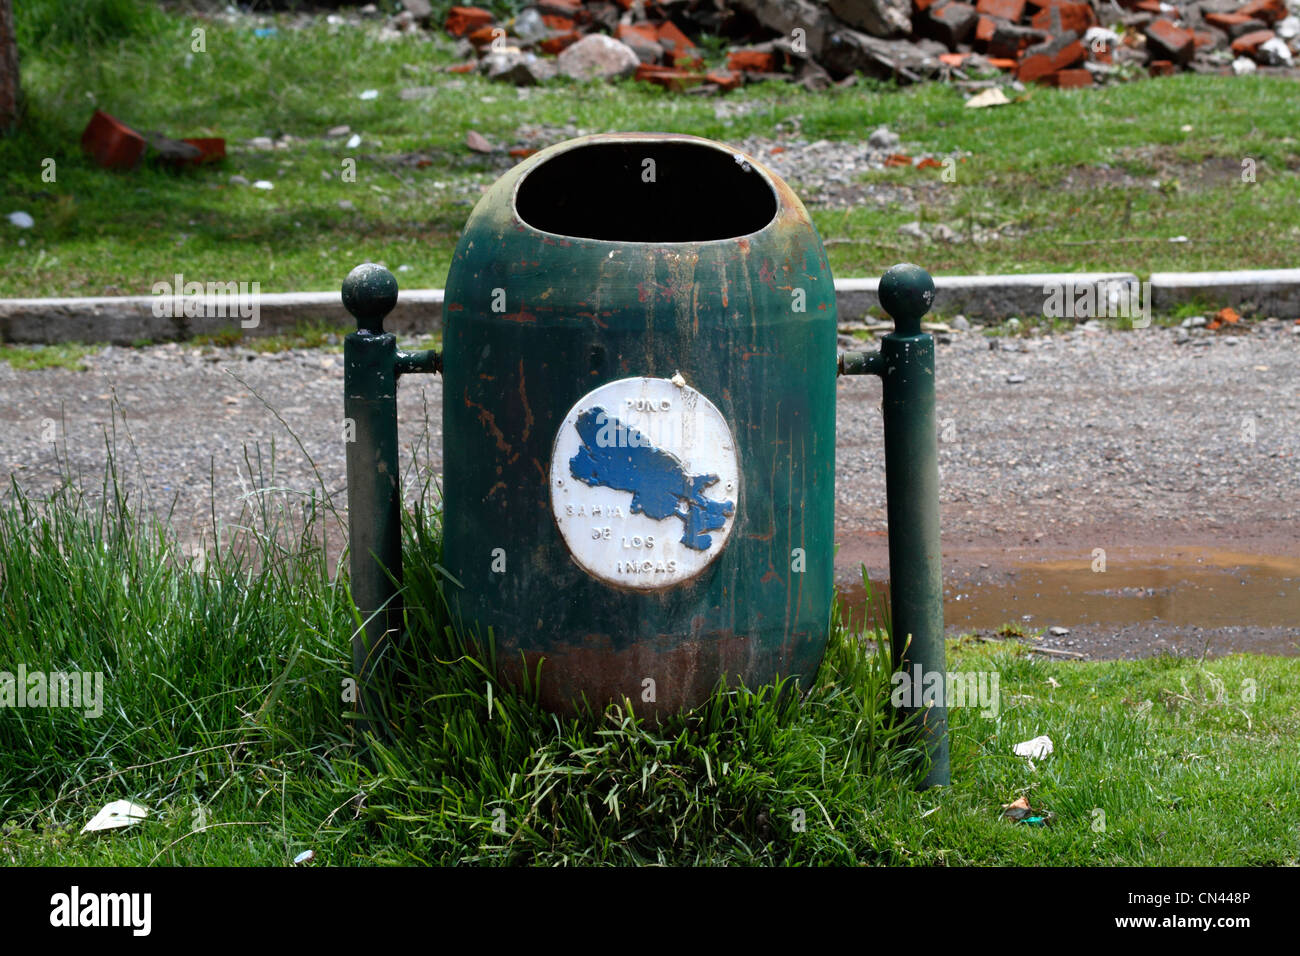 Rubbish bin with simple map / outline of Lake Titicaca painted on it, part of a campaign to keep the Lake clean and unpolluted, Puno, Peru Stock Photo